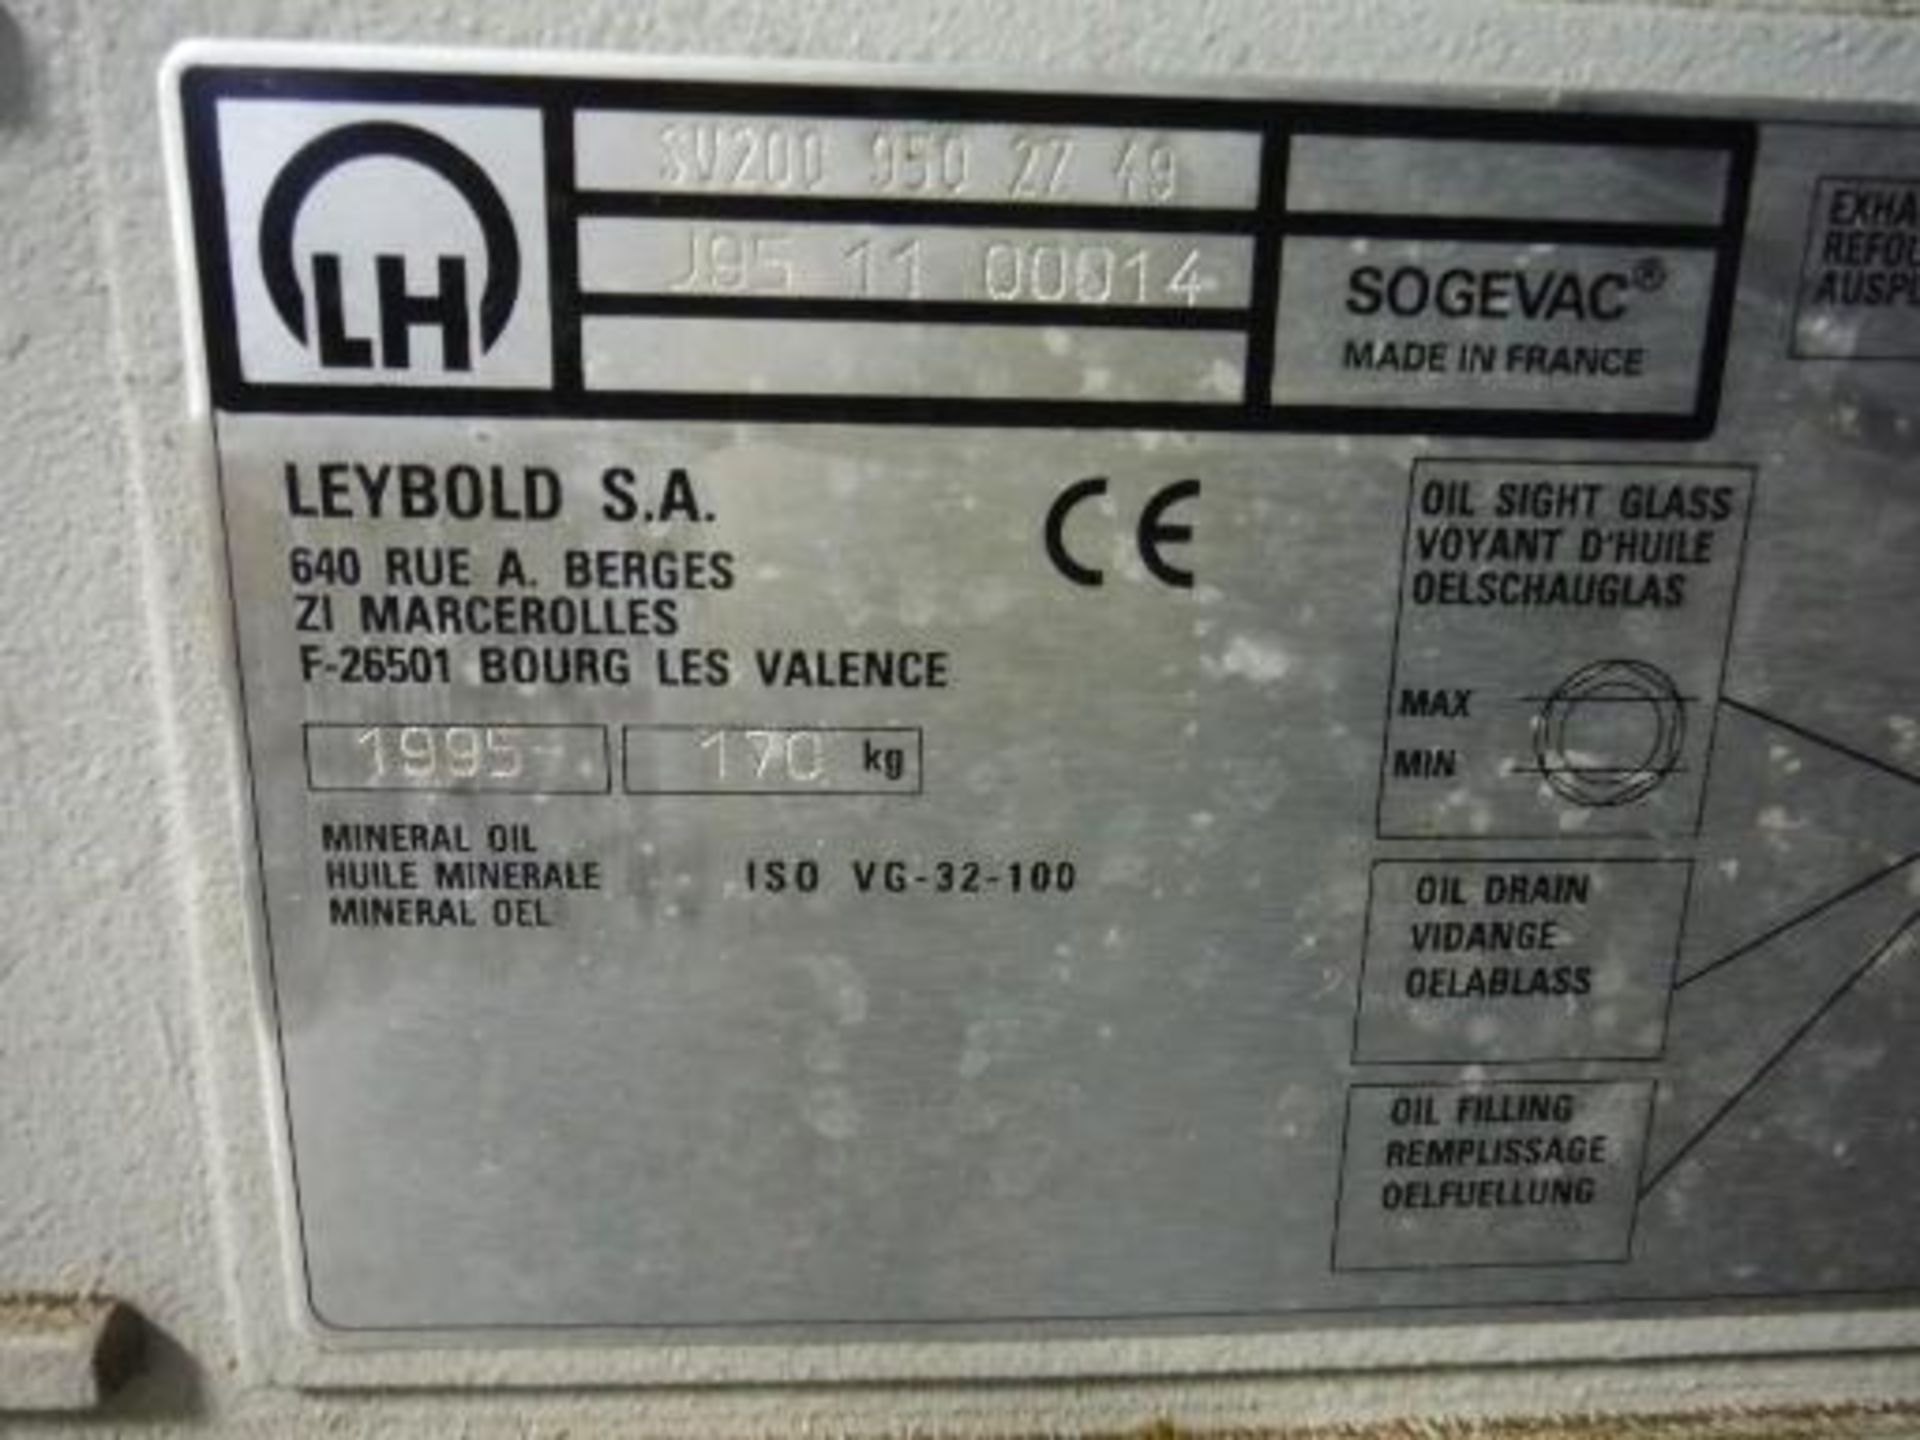 1995 Leybold vacuum pump on cart, Model SV200 950 27 49, SN J95 11 00014, with 7.5 HP motor This - Image 3 of 5